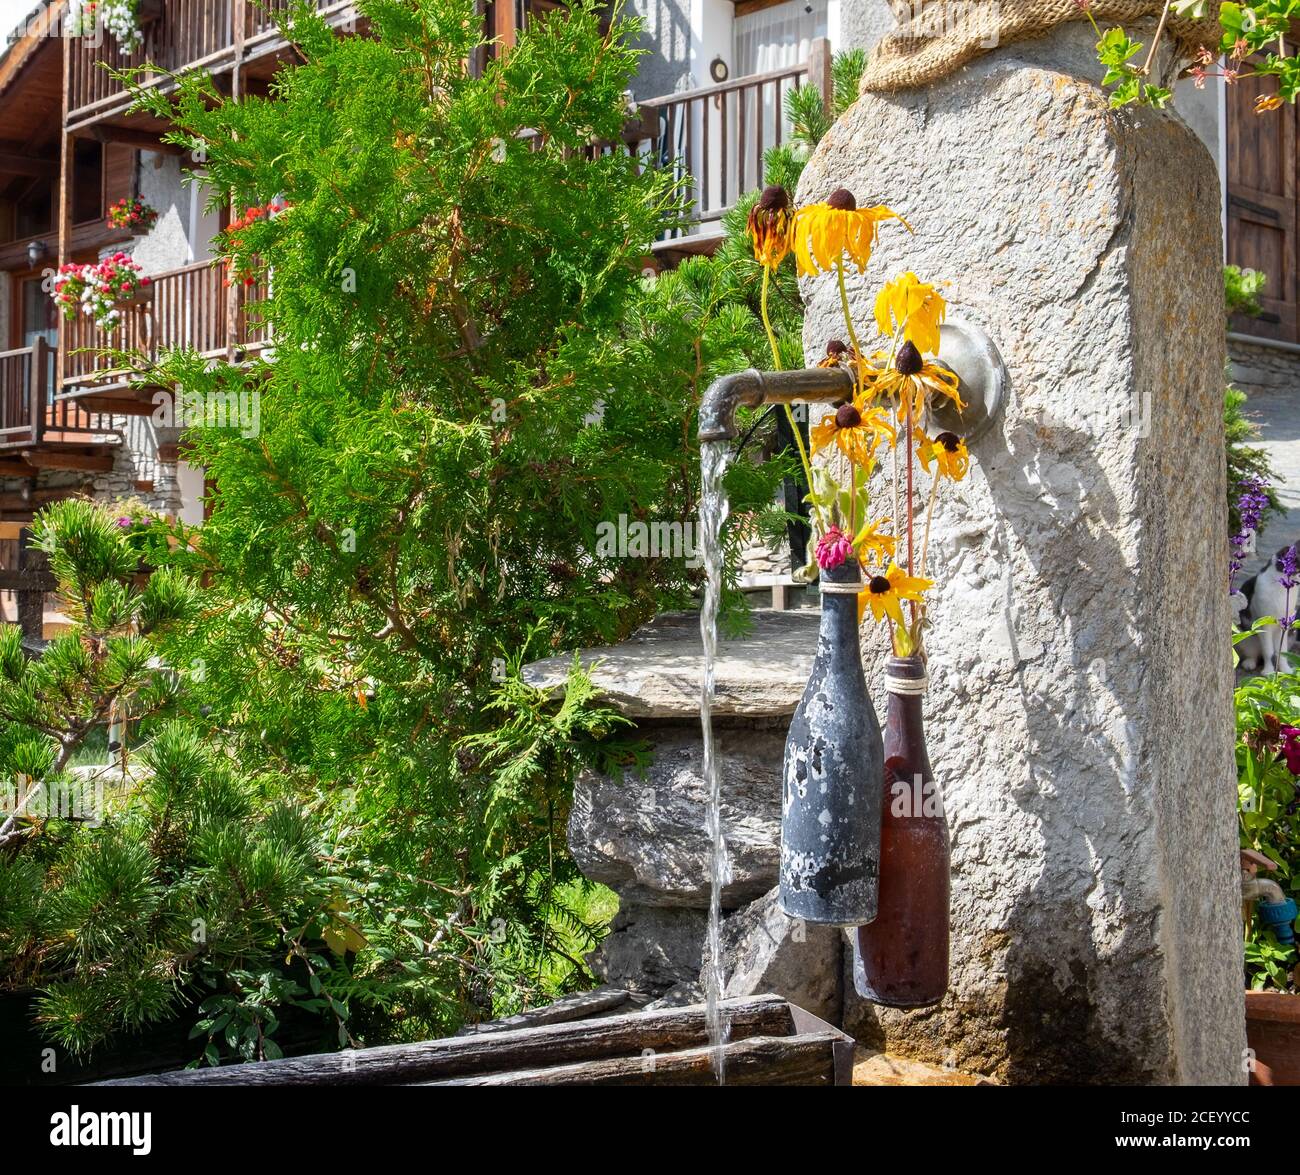 Old water fountain and bottles with yellow flowers in the small village of Usseaux, Piemonte,Italy Stock Photo